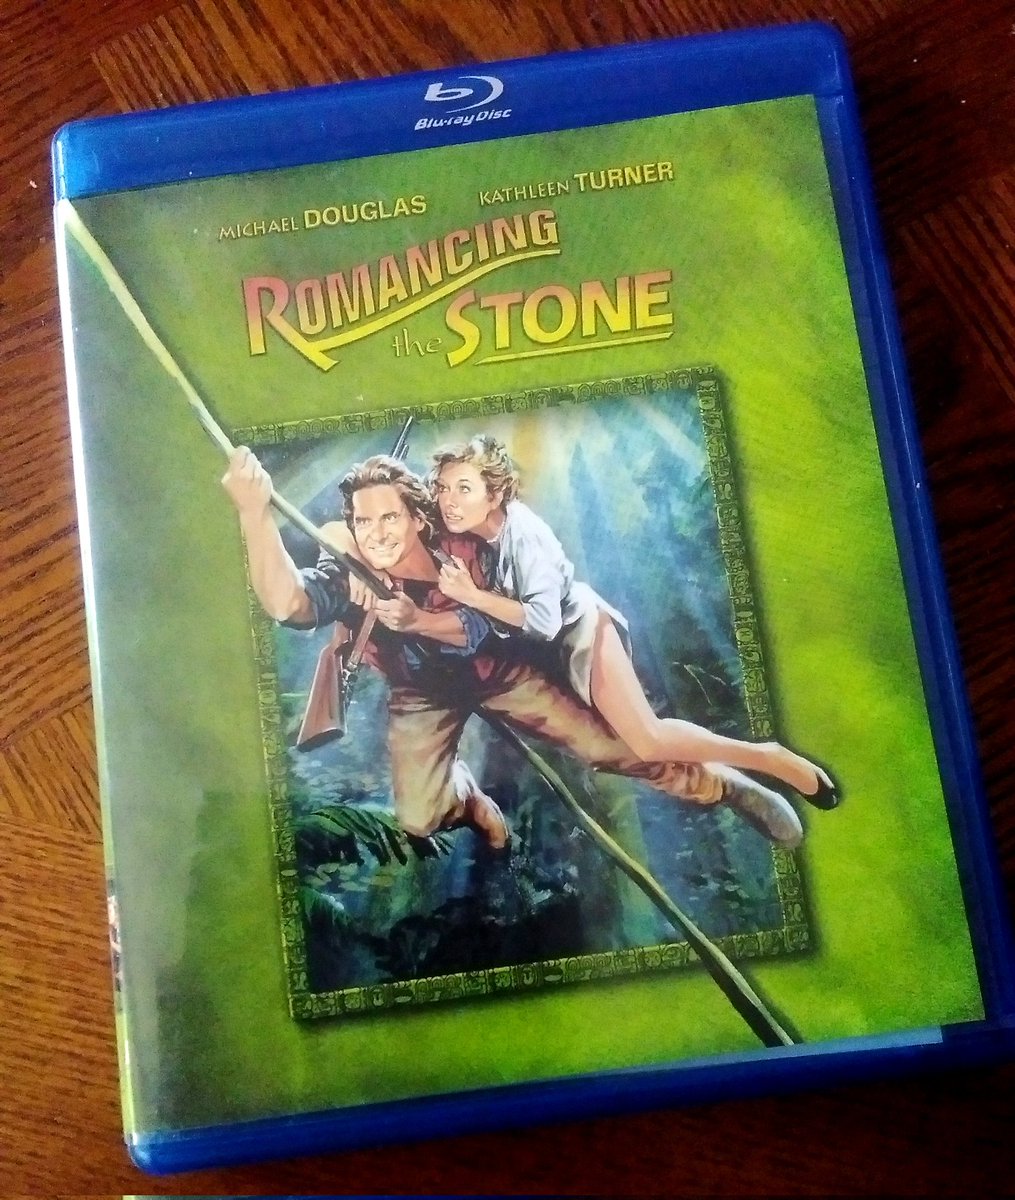 Happy 40th Anniversary to #RomancingTheStone, which opened this day in 1984. #NowWatching